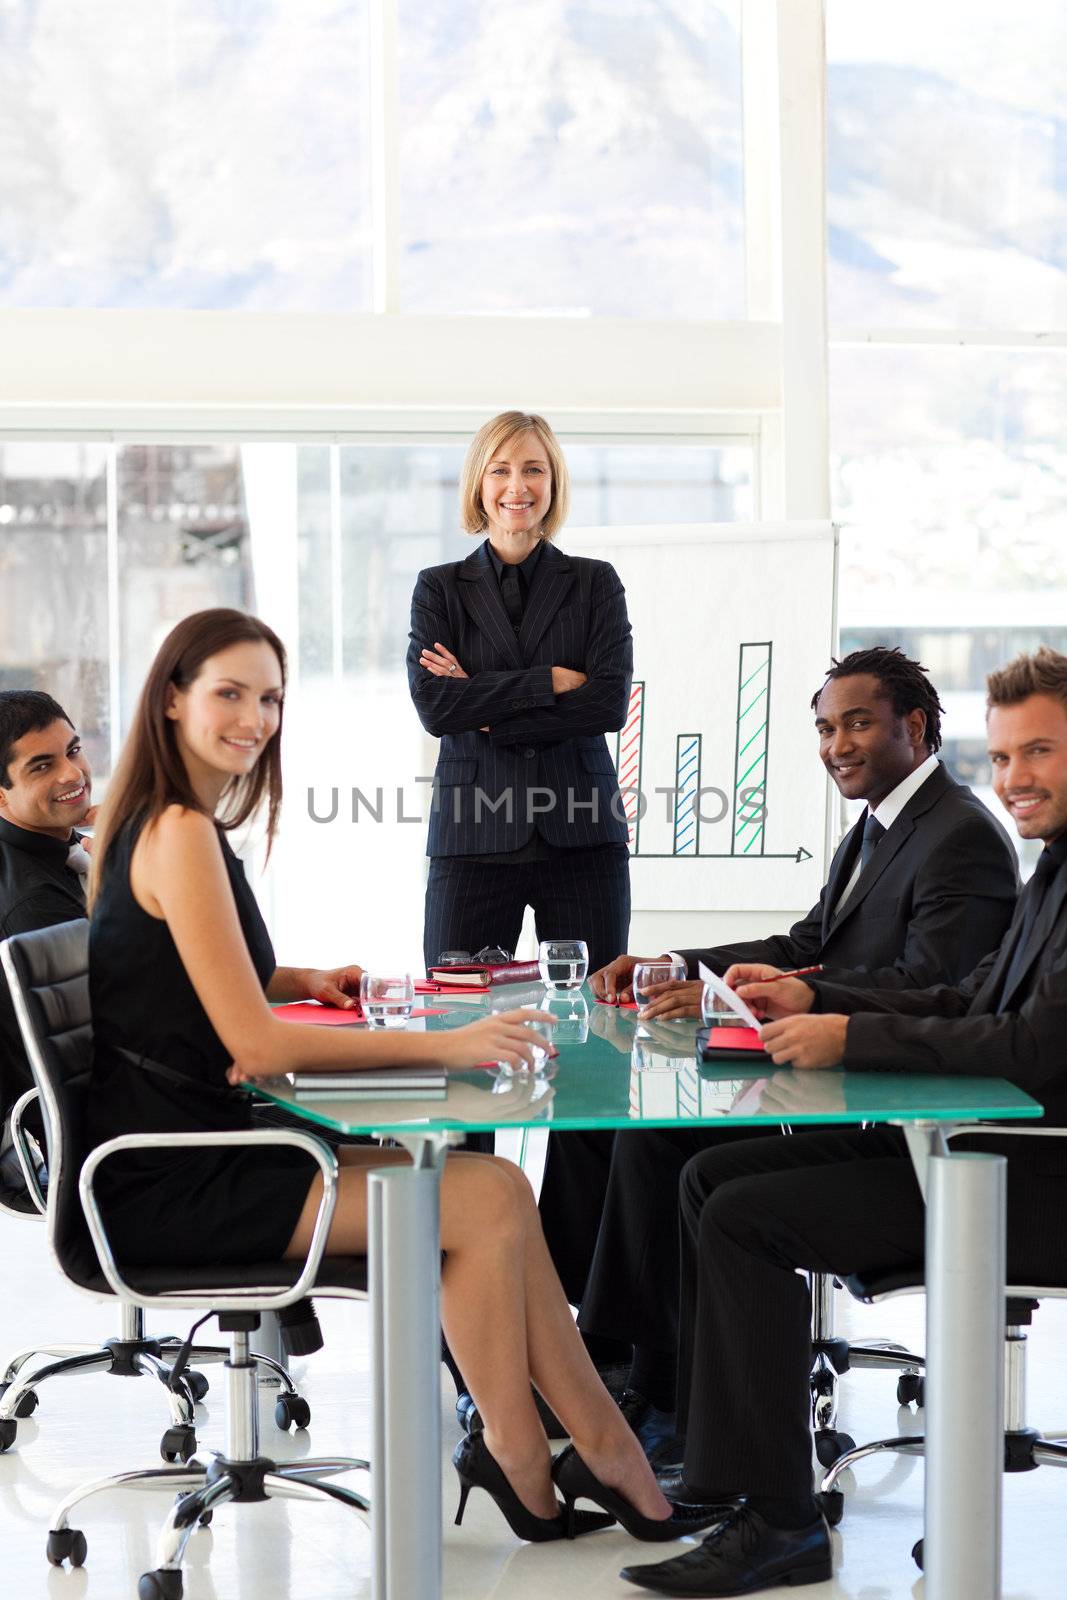 International business people smiling at the camera in a meeting